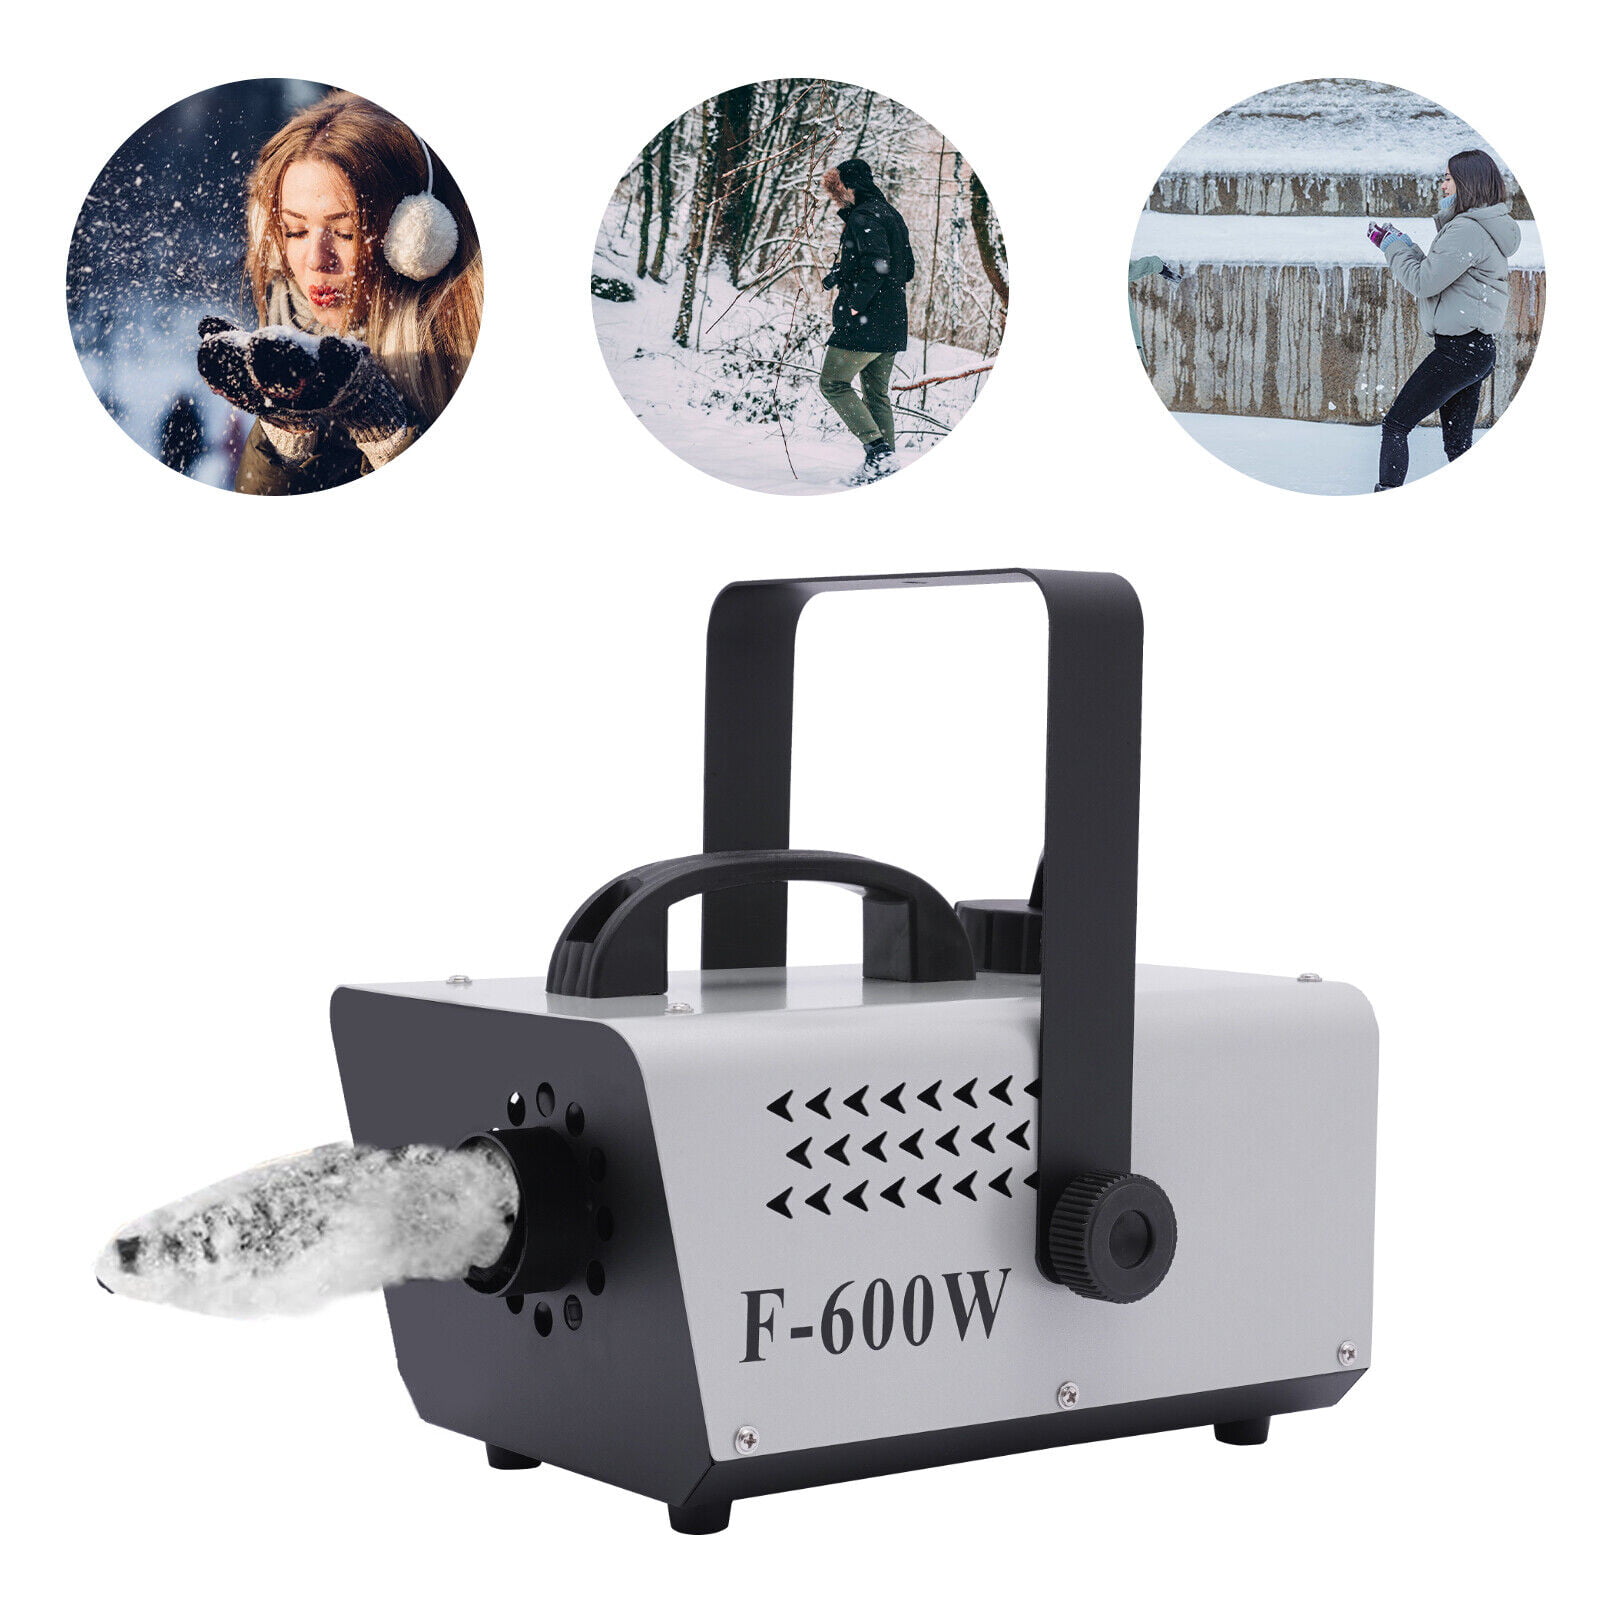  Retisee 2 Pcs Snow Machine 650W Wired Snow Making Machine  Snowflake Snow Maker Machine with Wireless Remote Control for Christmas  Wedding Holidays Fiestas DJ Parties : Musical Instruments